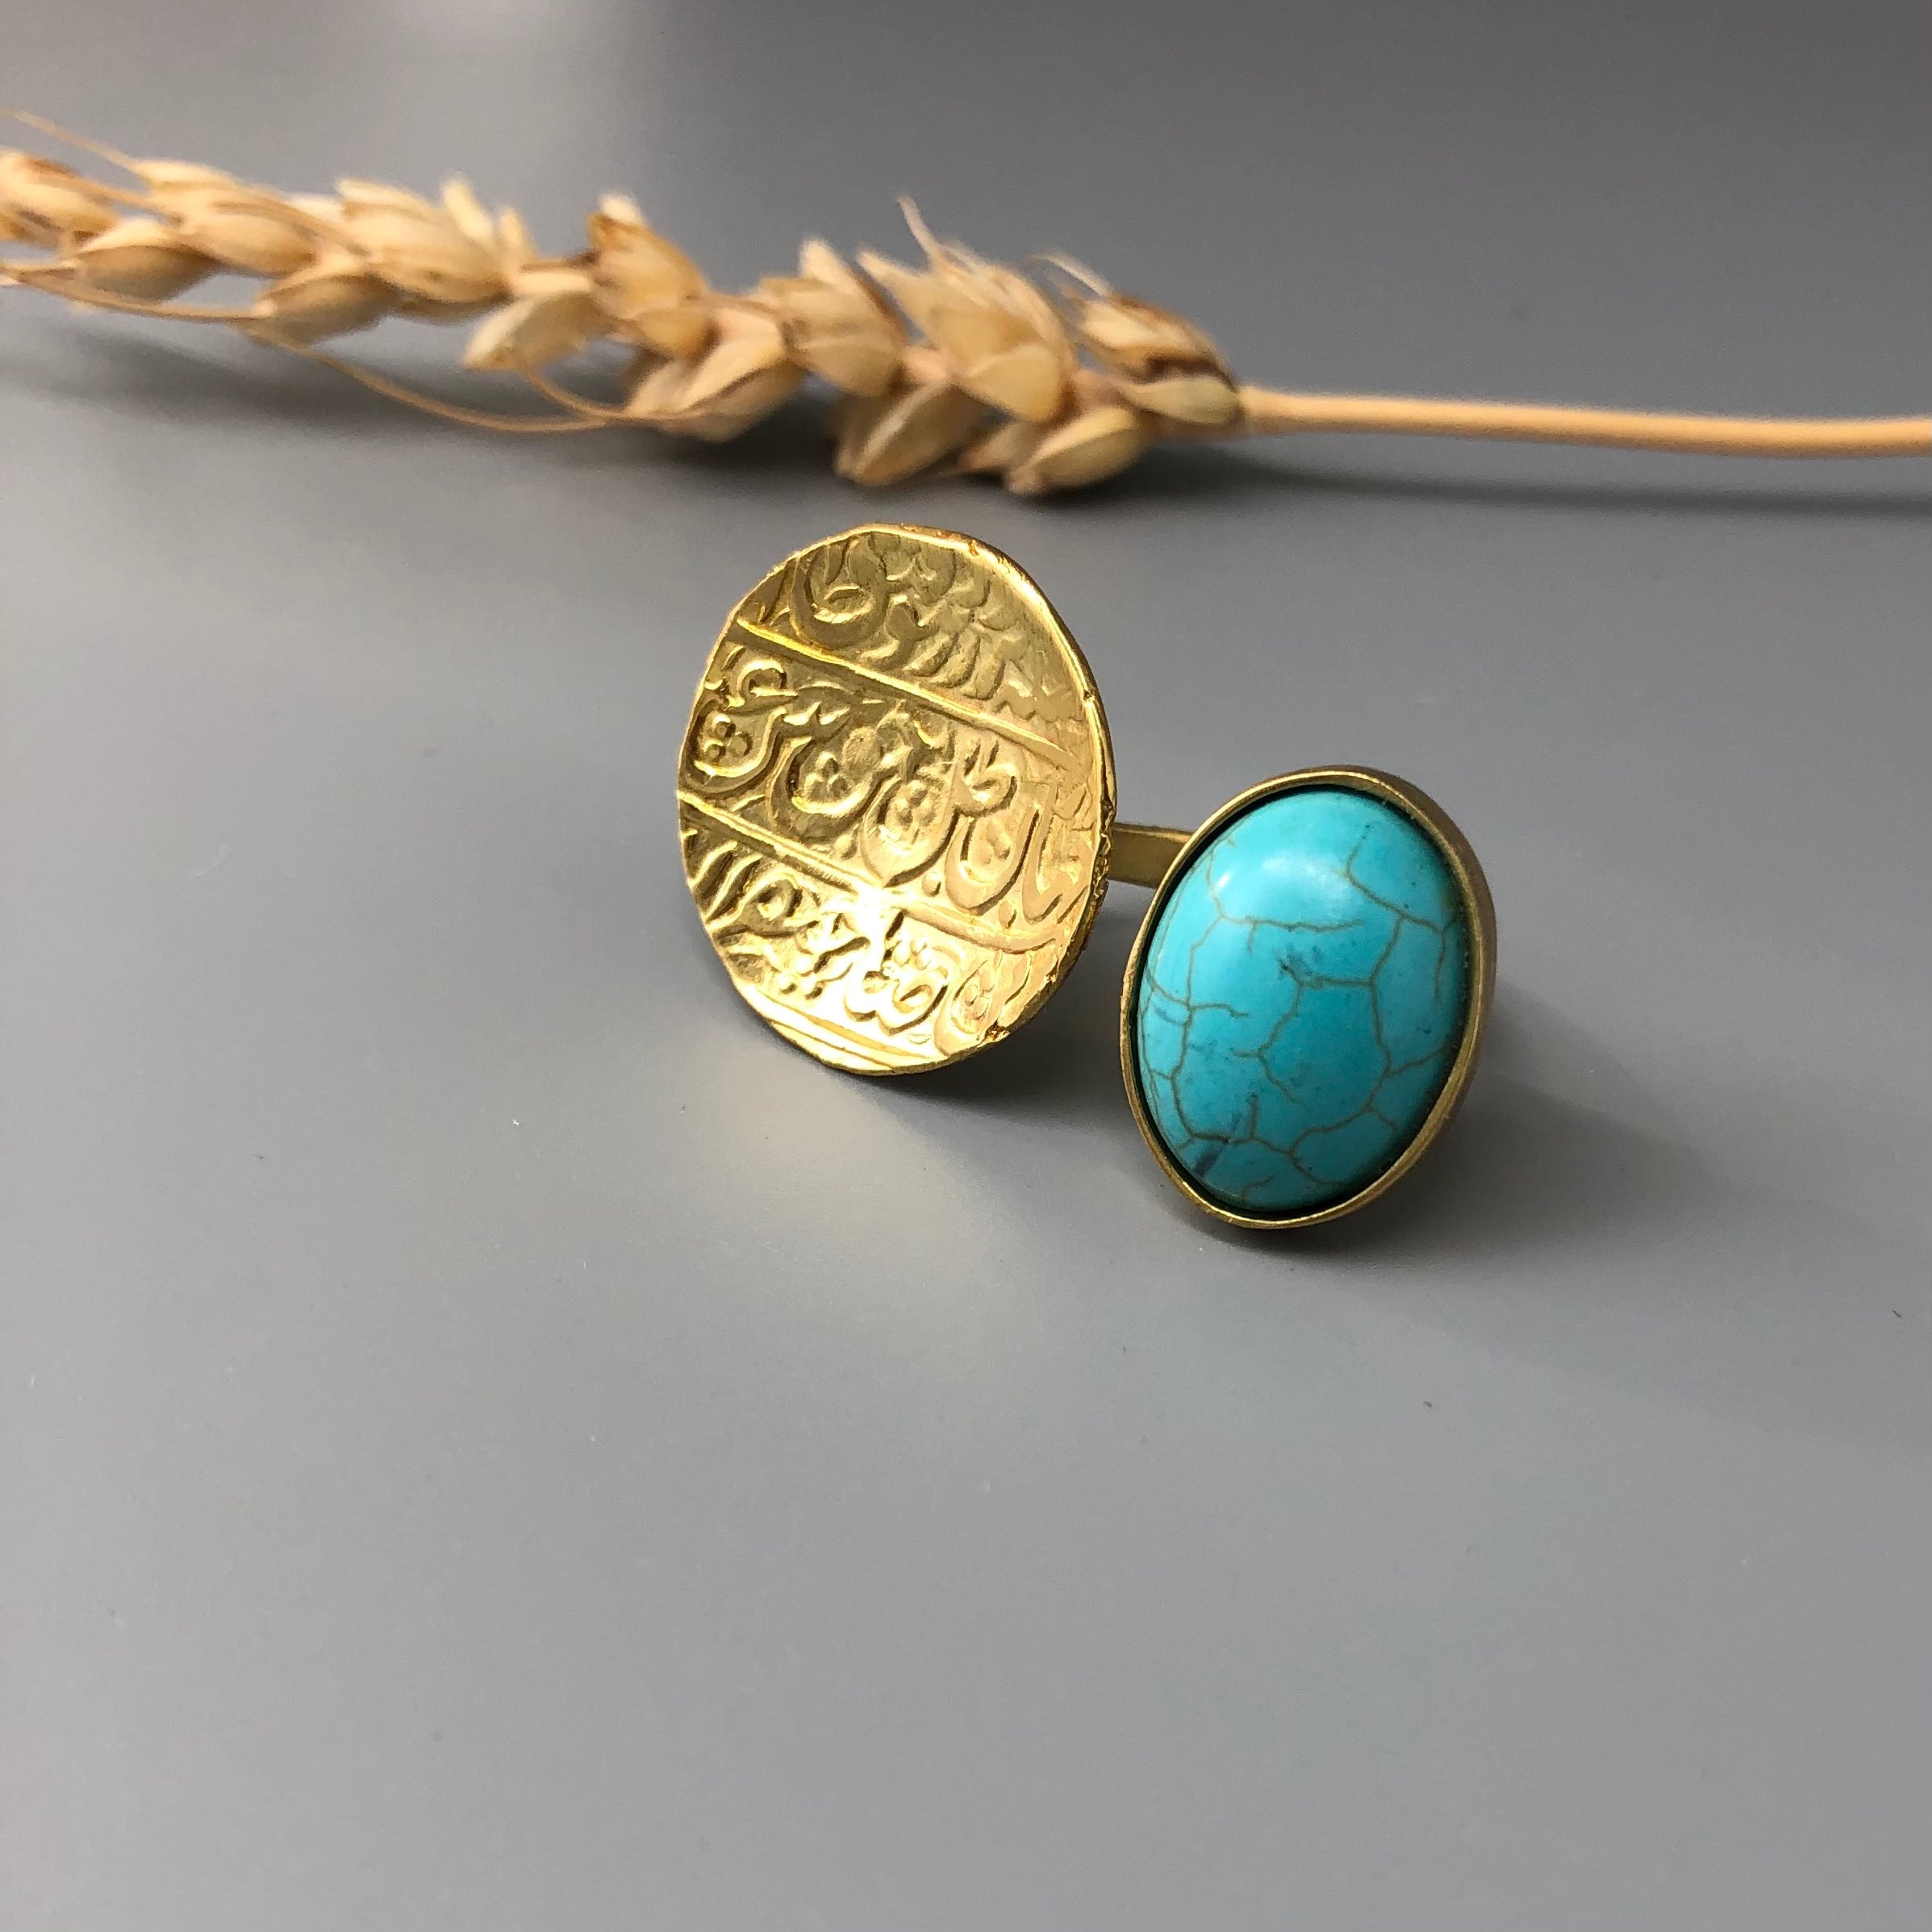 Persian Turquoise Jewelry-Persian Coin Ring with Turquoise: Persian Jewelry-AFRA ART GALLERY